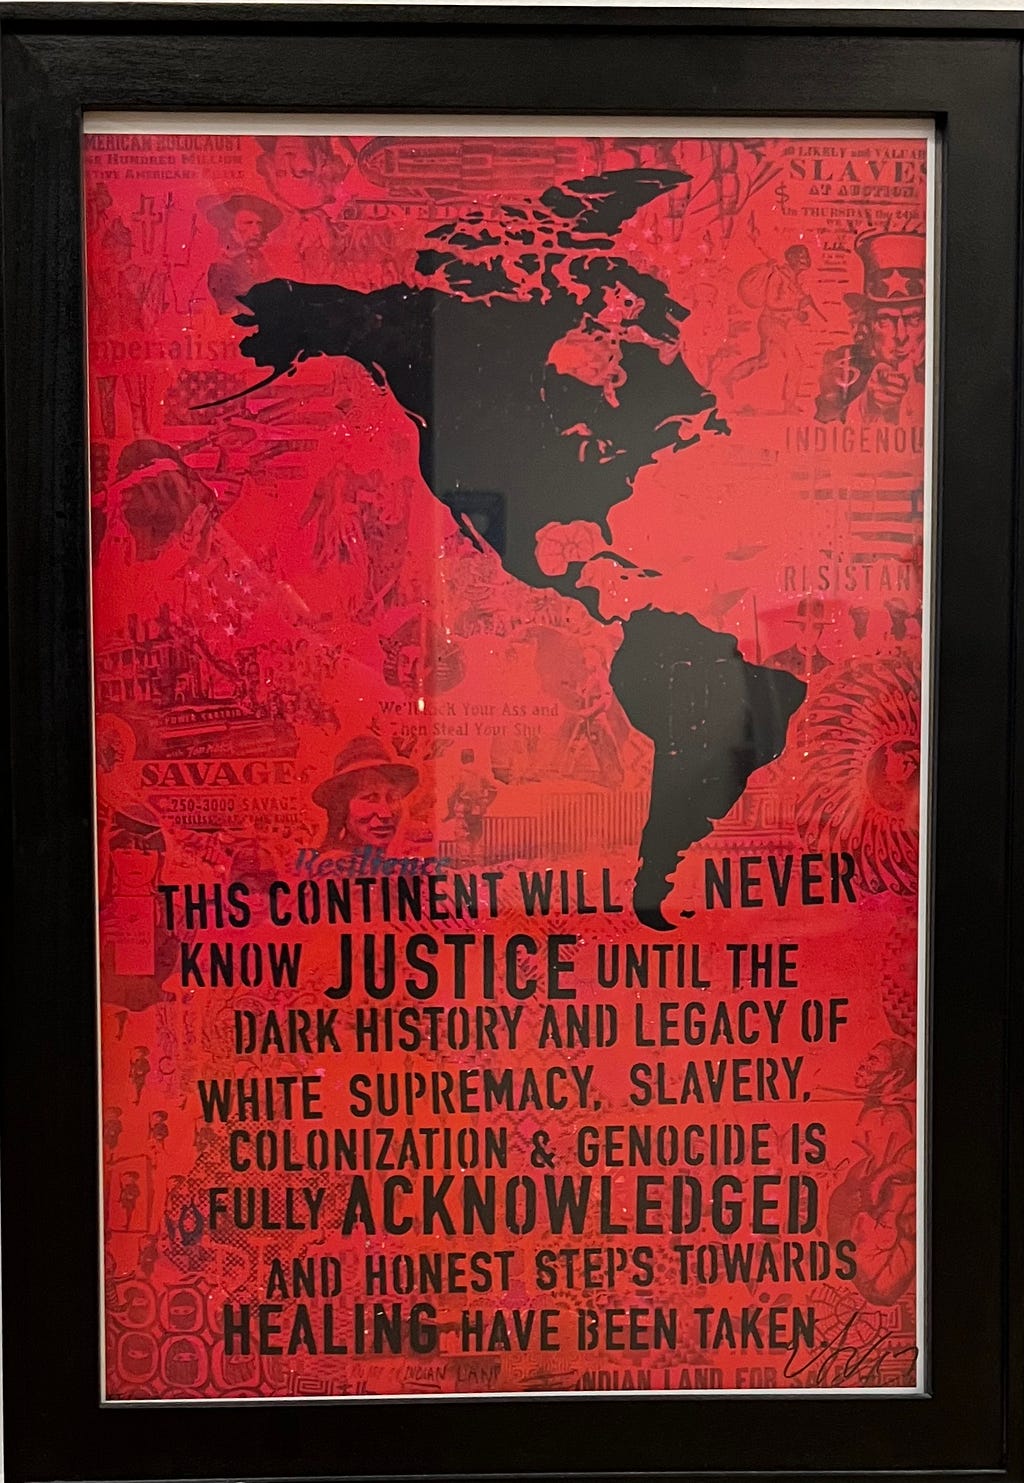 Picture of framed poster that says: This continent will never know justice until the dark history and legacy of white supremacy, slavery, colonization, and genocide is fully acknowledged and honest steps towards healing have been taken.